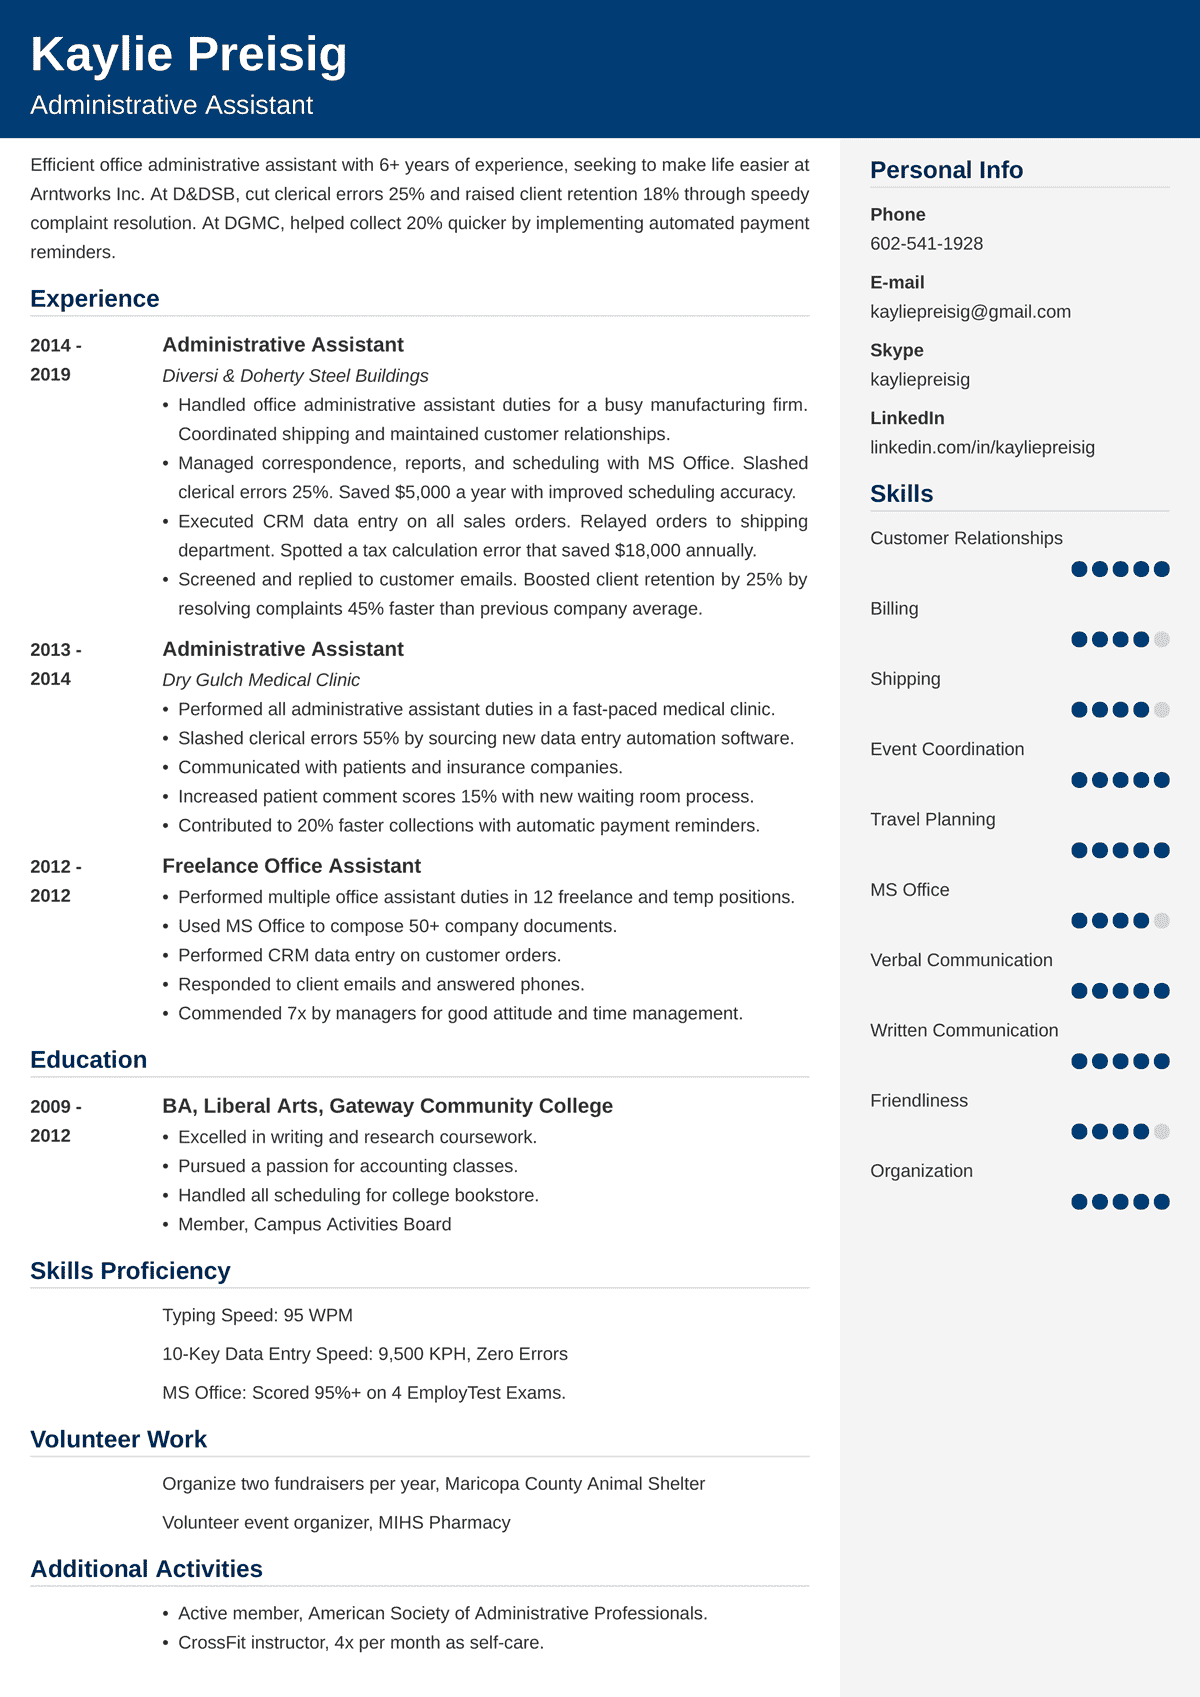 administrative assistant resume profile summary